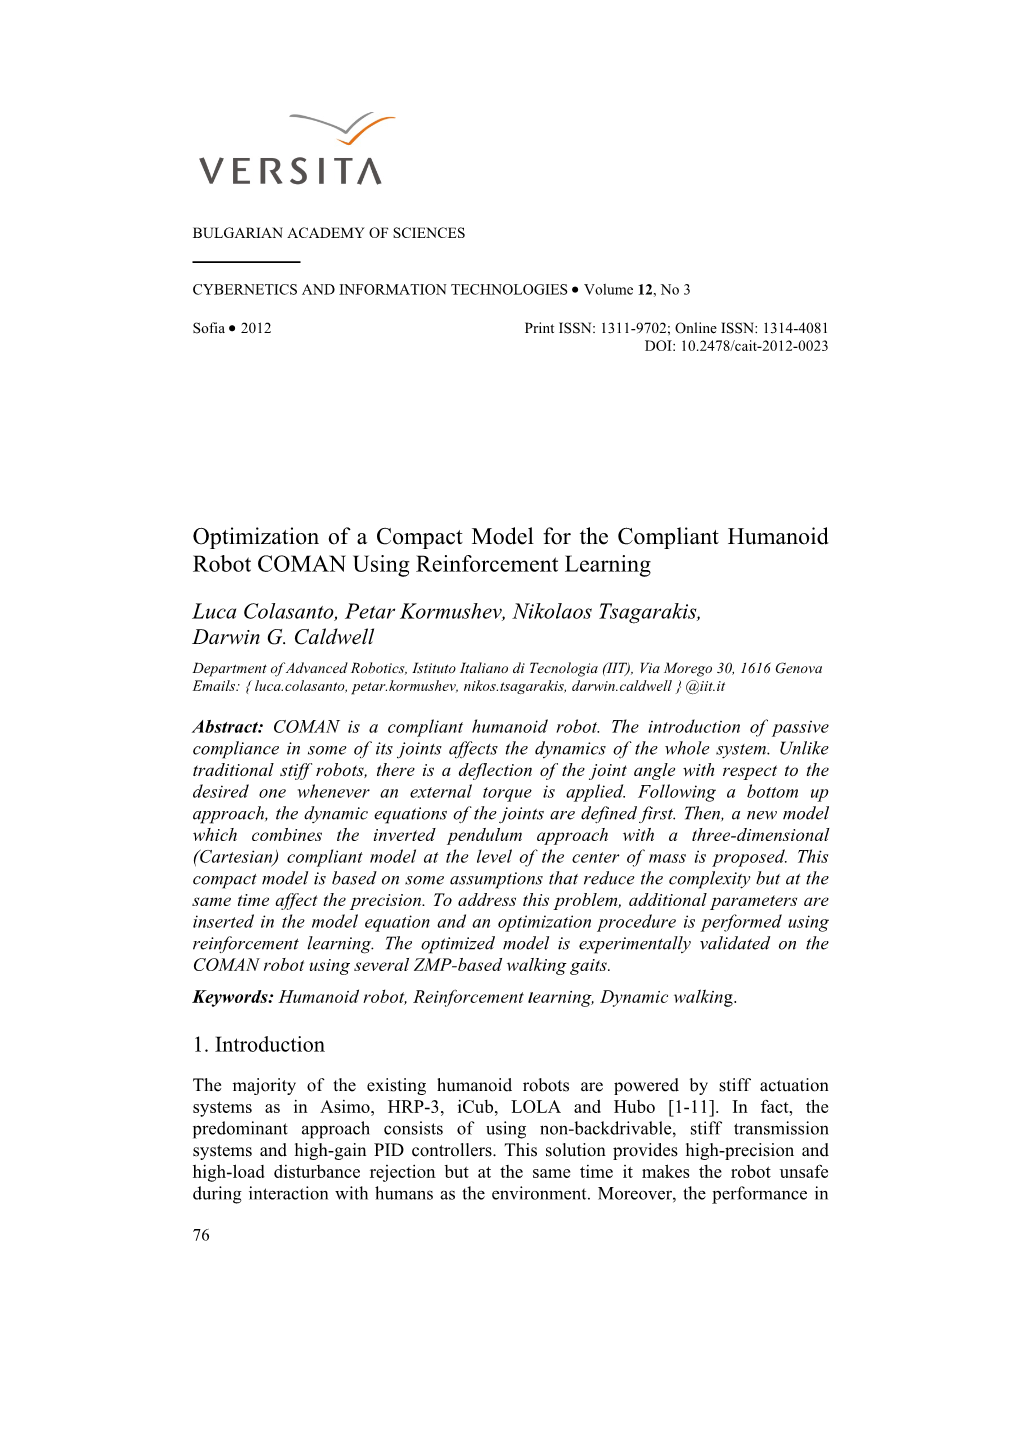 Optimization of a Compact Model for the Compliant Humanoid Robot COMAN Using Reinforcement Learning